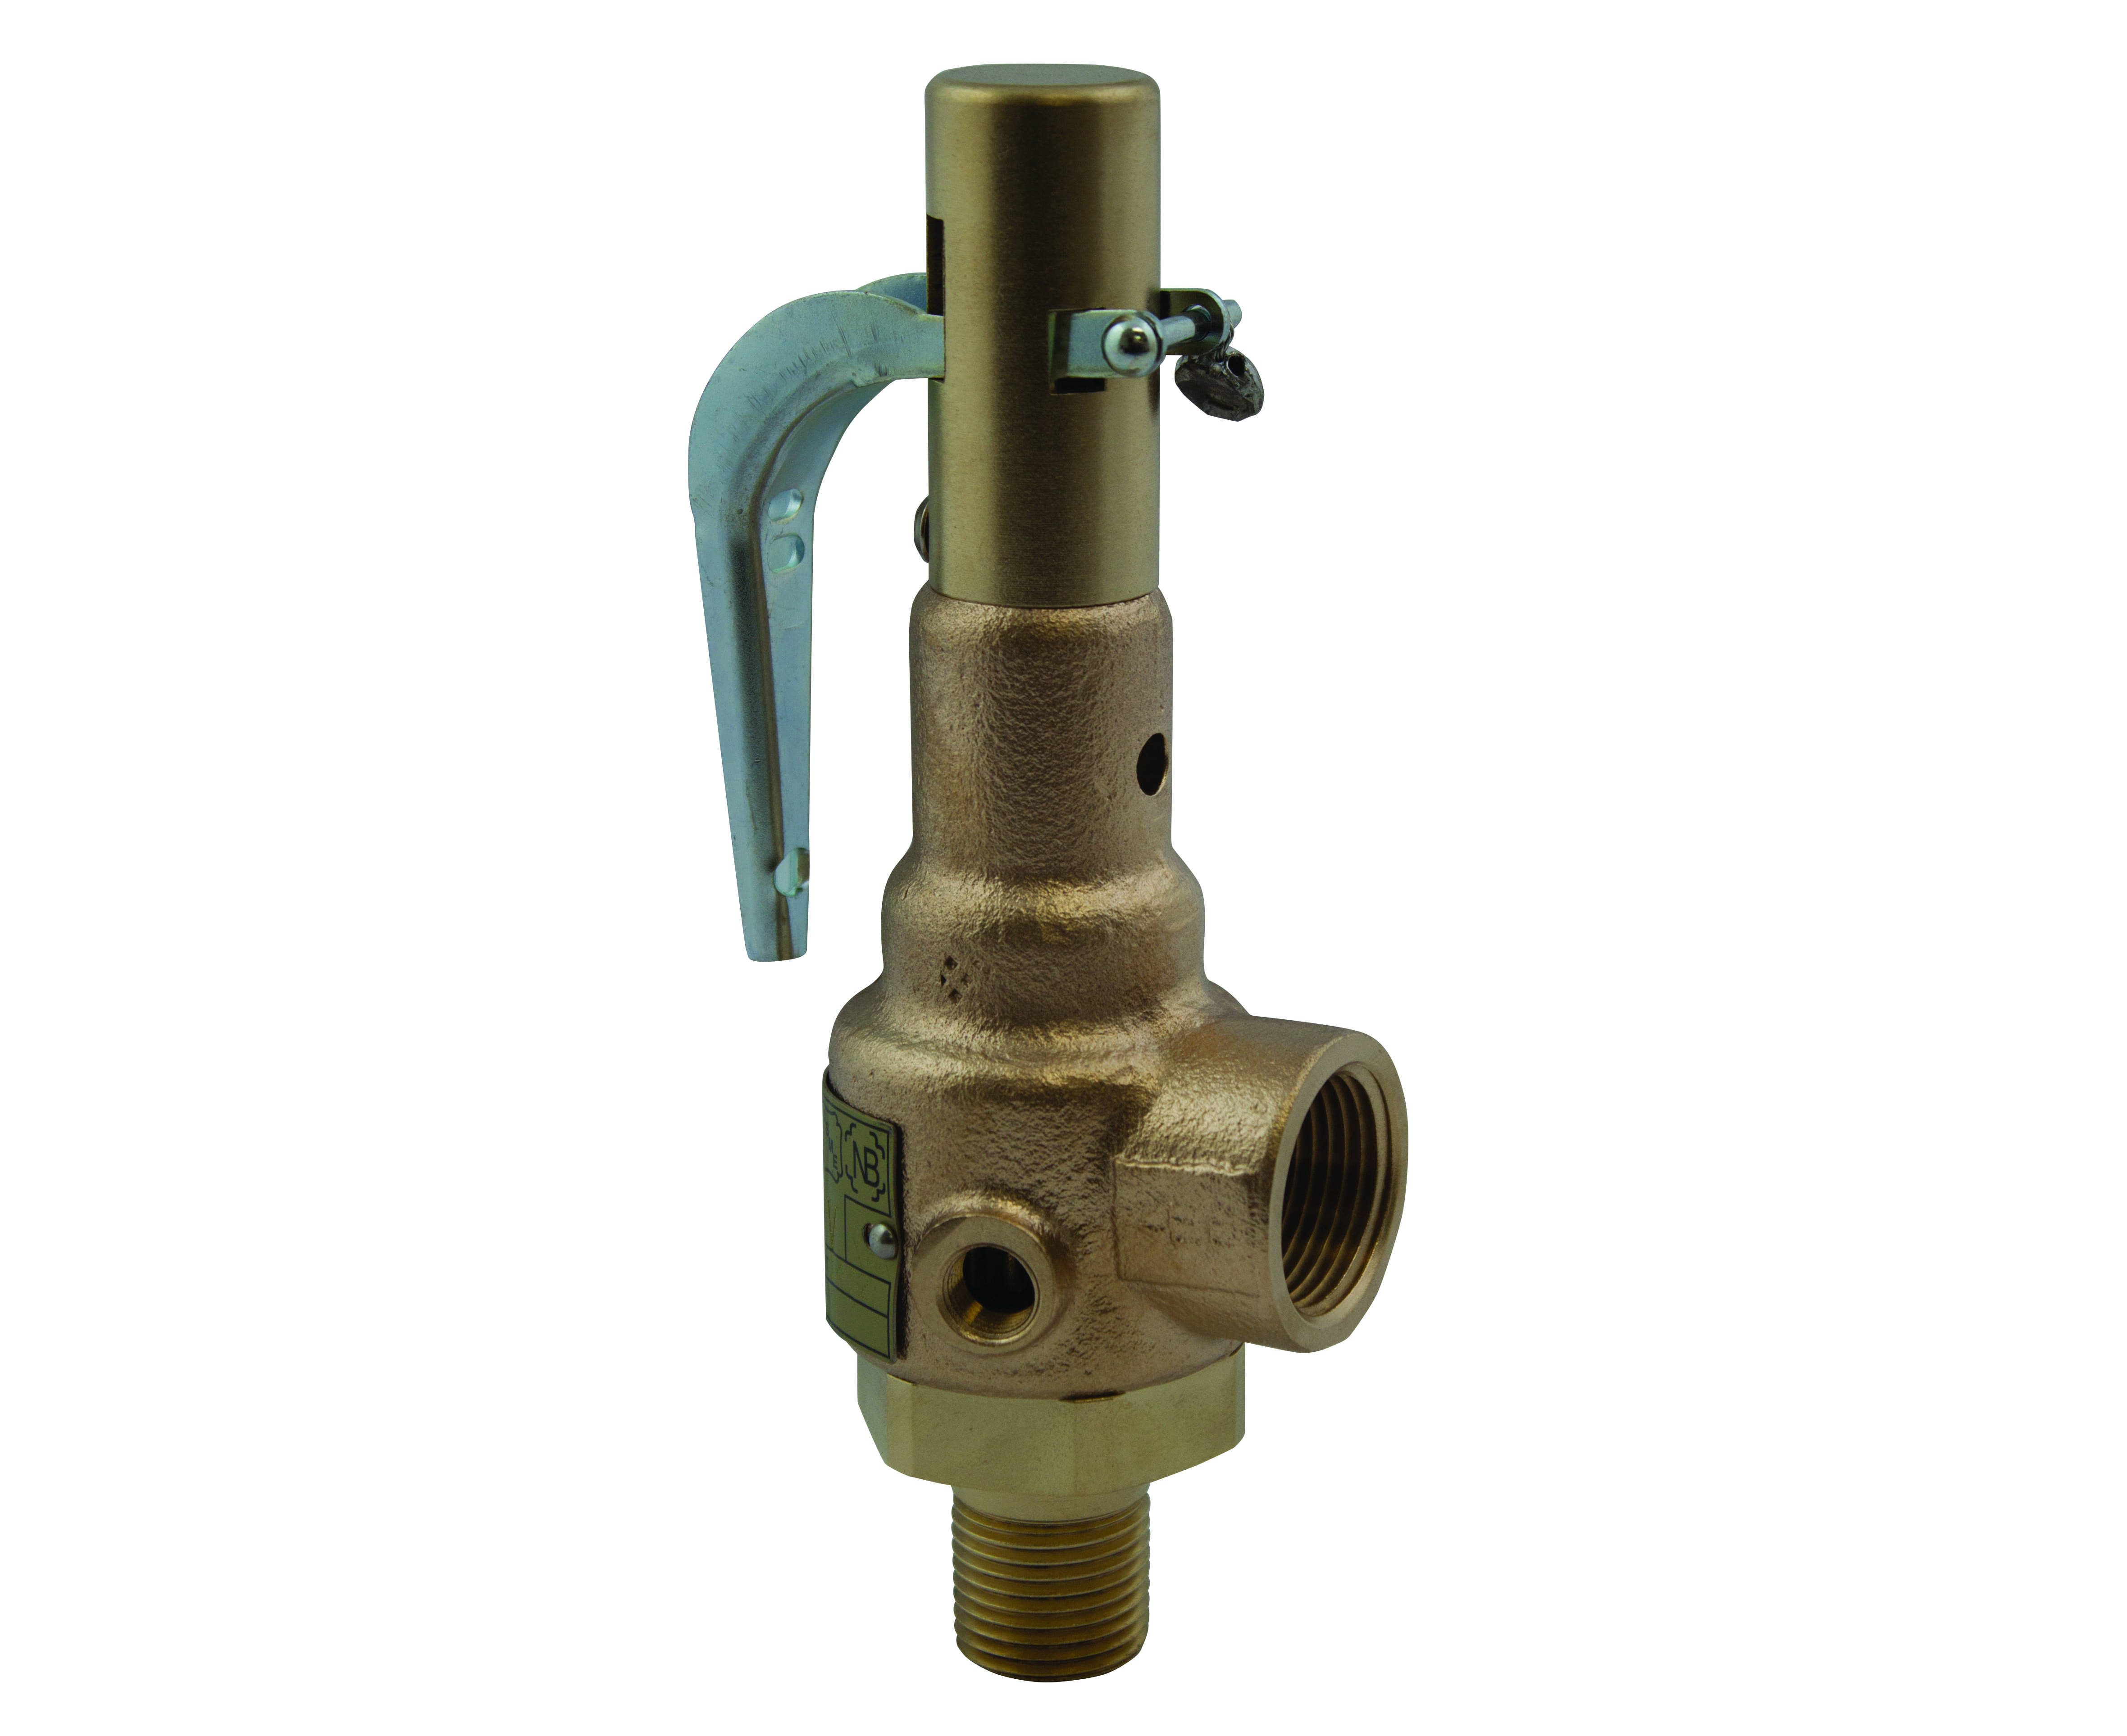 Preview image for Apollo ASME Sec VIII Air Bronze Safety Relief Valves with Brass Trim, Teflon Seat, Anti-Vibration Trim & Performance Test Reports Included, 1-1/2" (MNPT x FNPT)